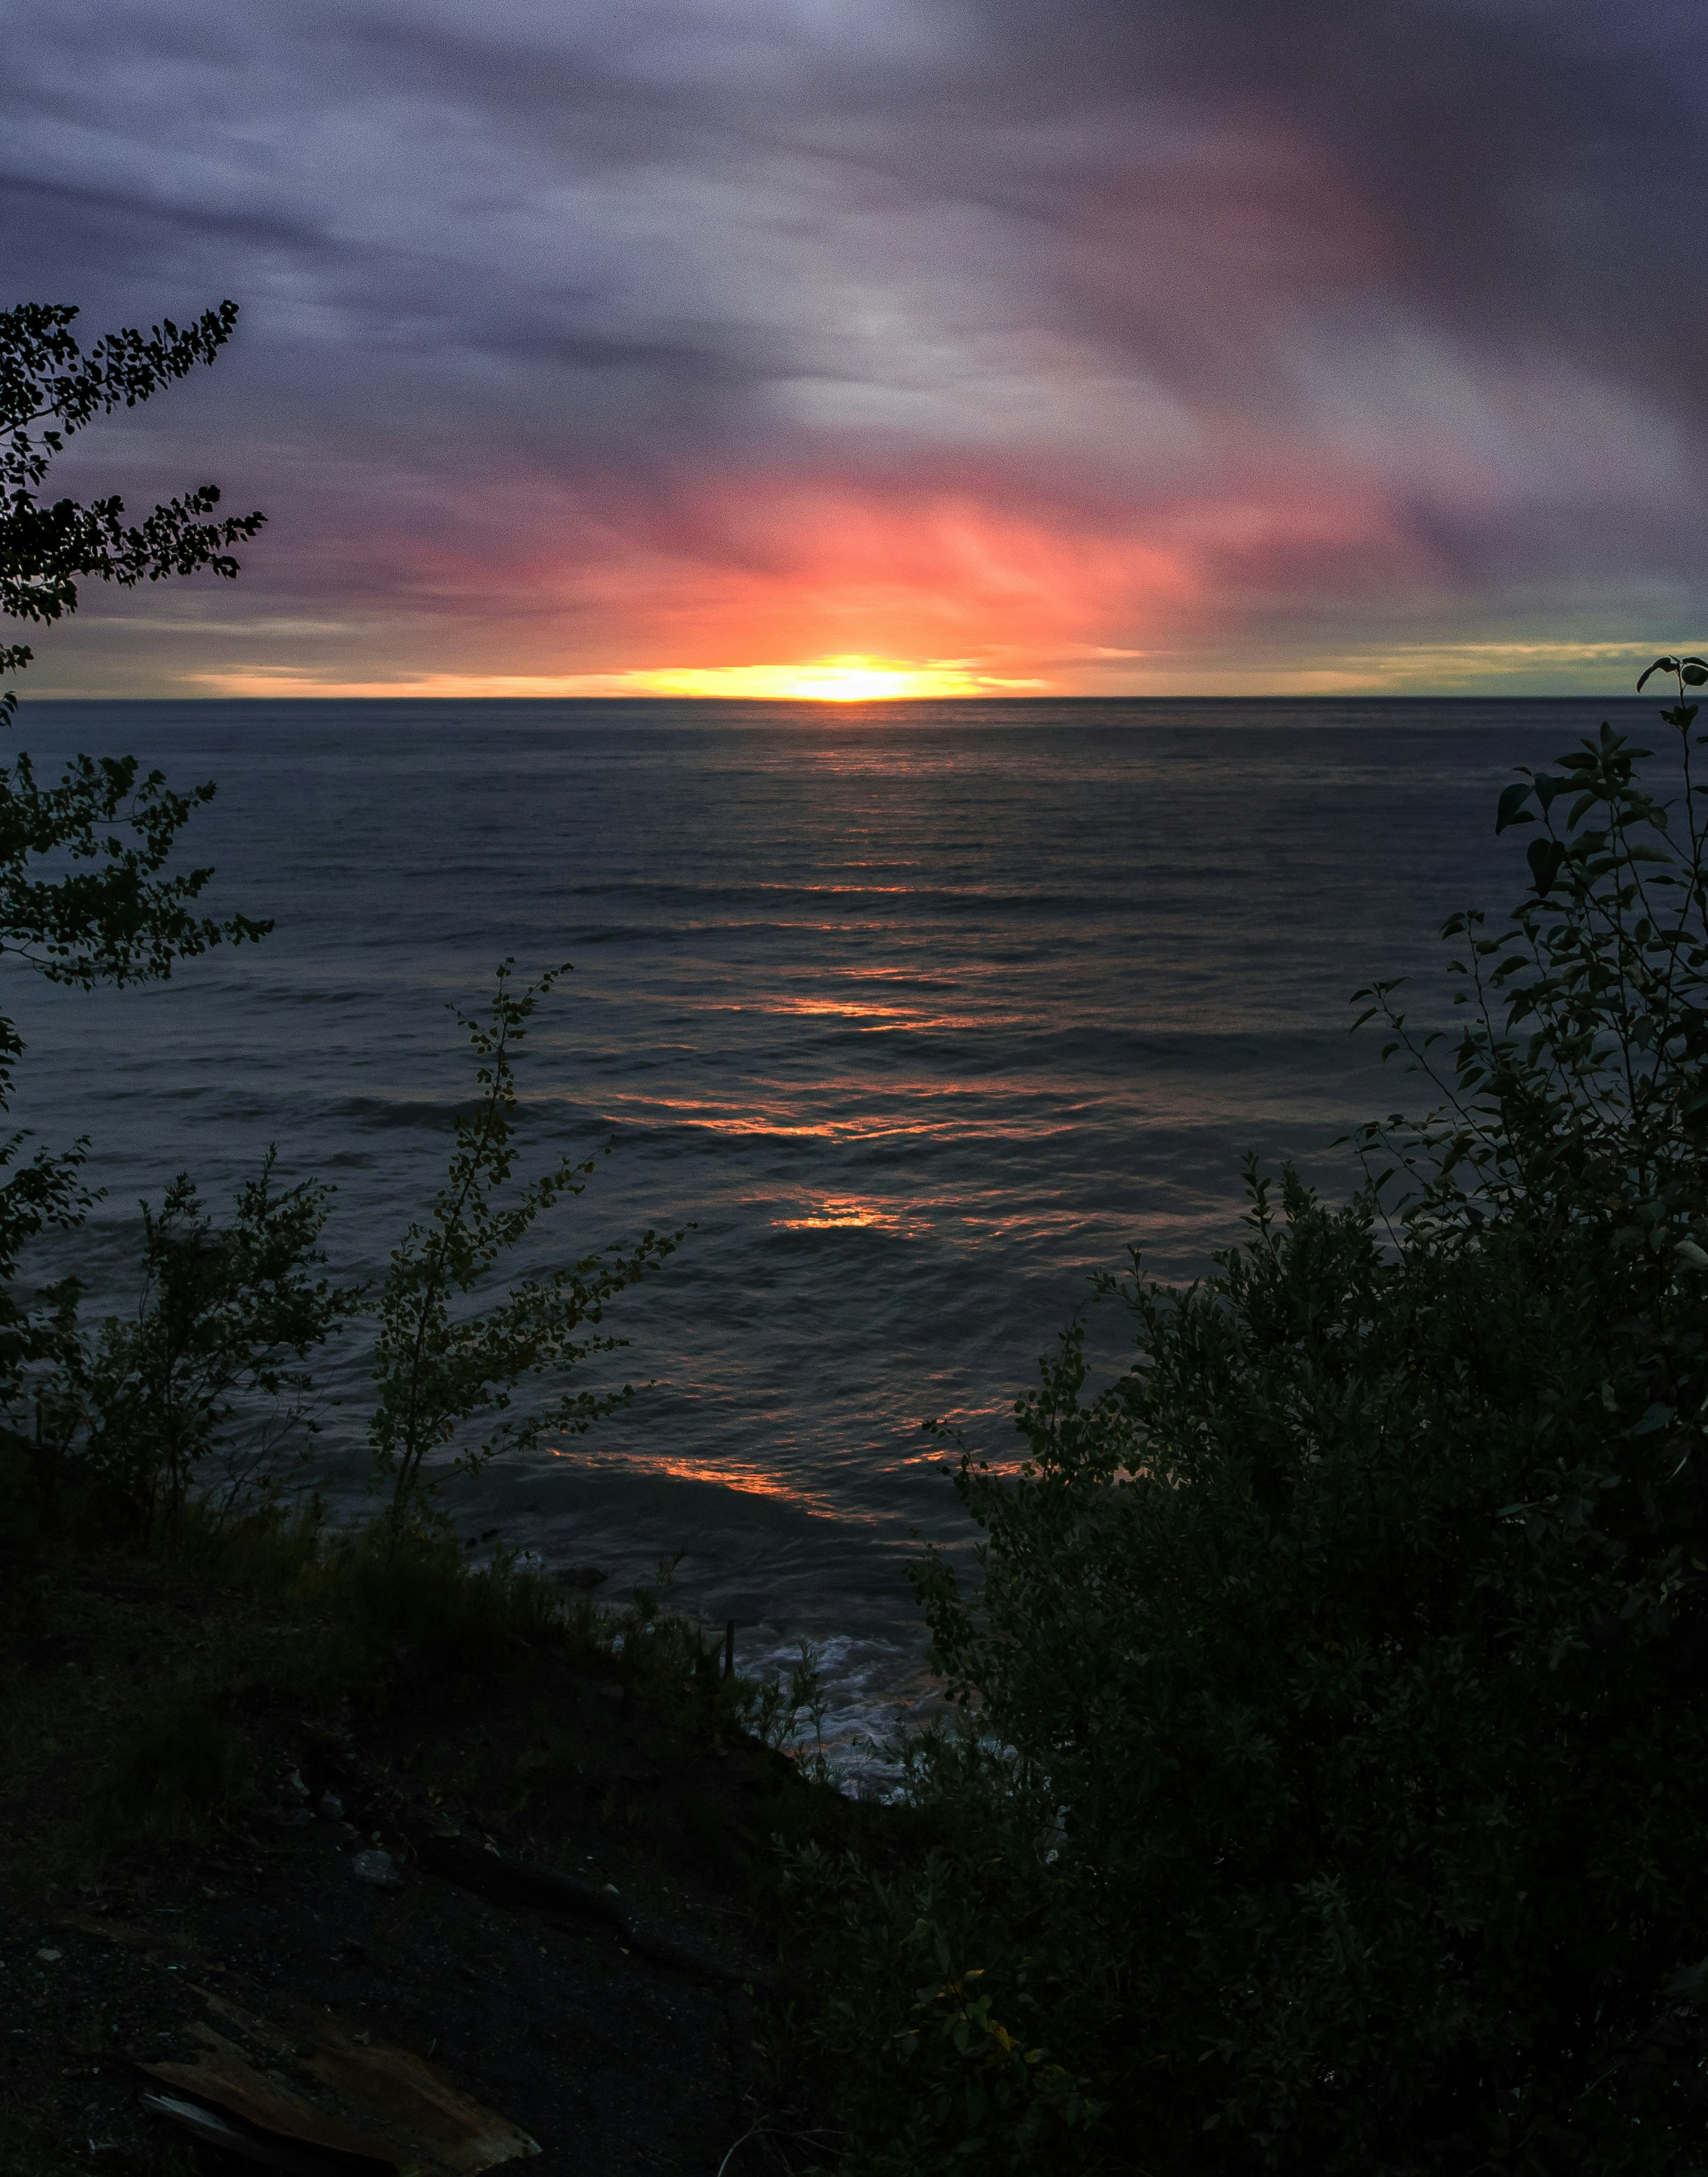 Its a seemingly quaint little spot in Michigan’s Keweenaw, but Lake Superior’s sunsets always deliver.